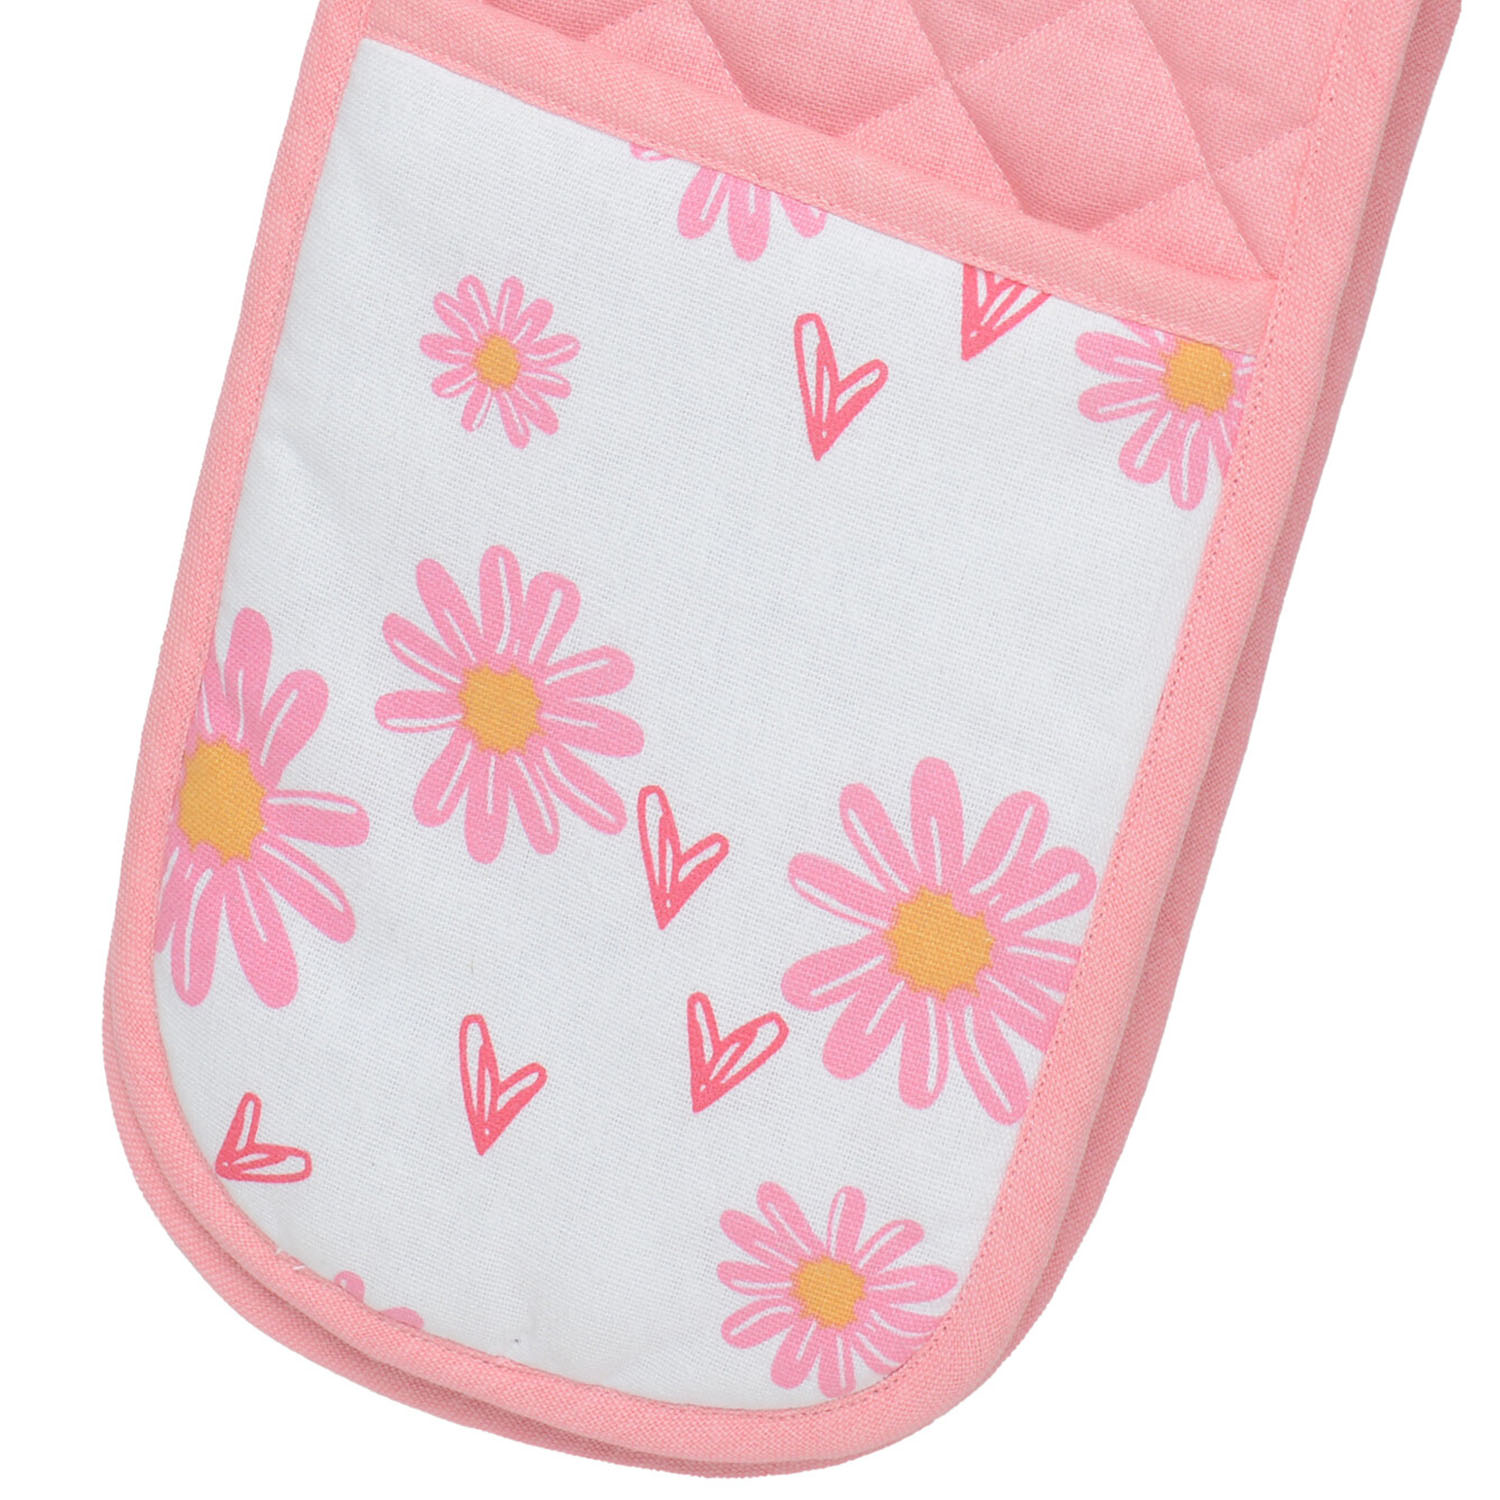 Daisy Daze Double Oven Gloves - Pink Image 3